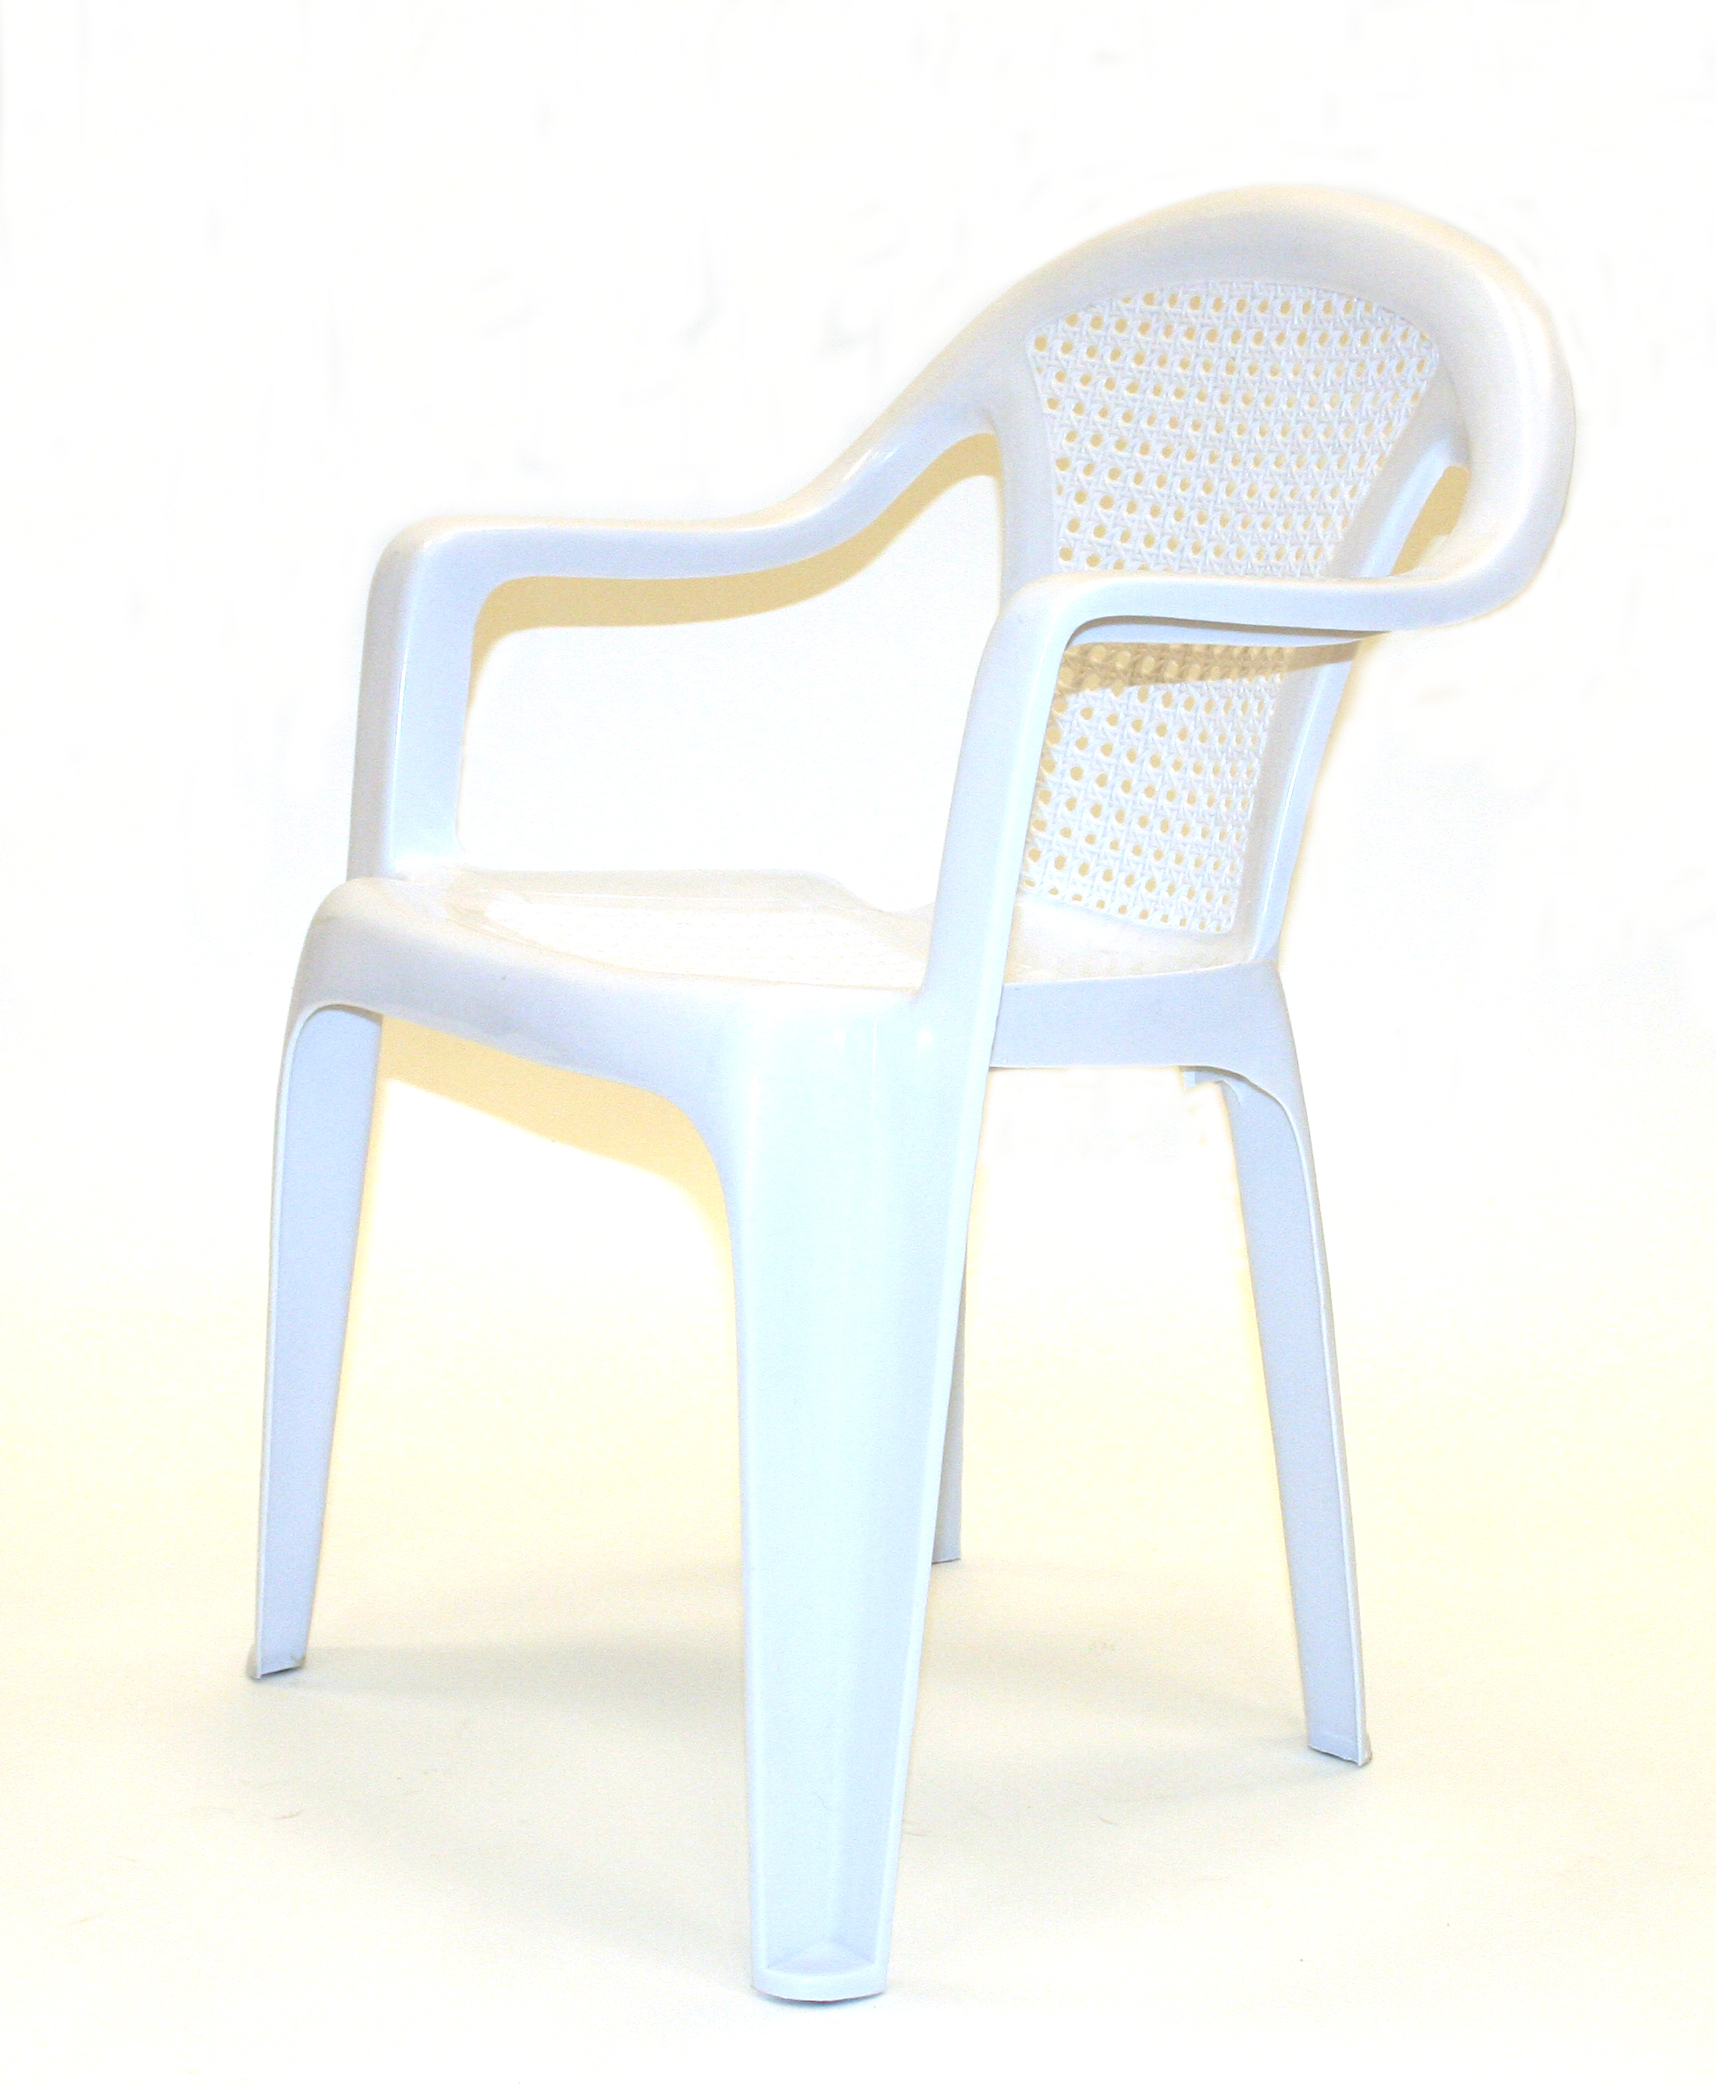 patio chair white plastic - cafe's, bistros or garden - be furniture sales